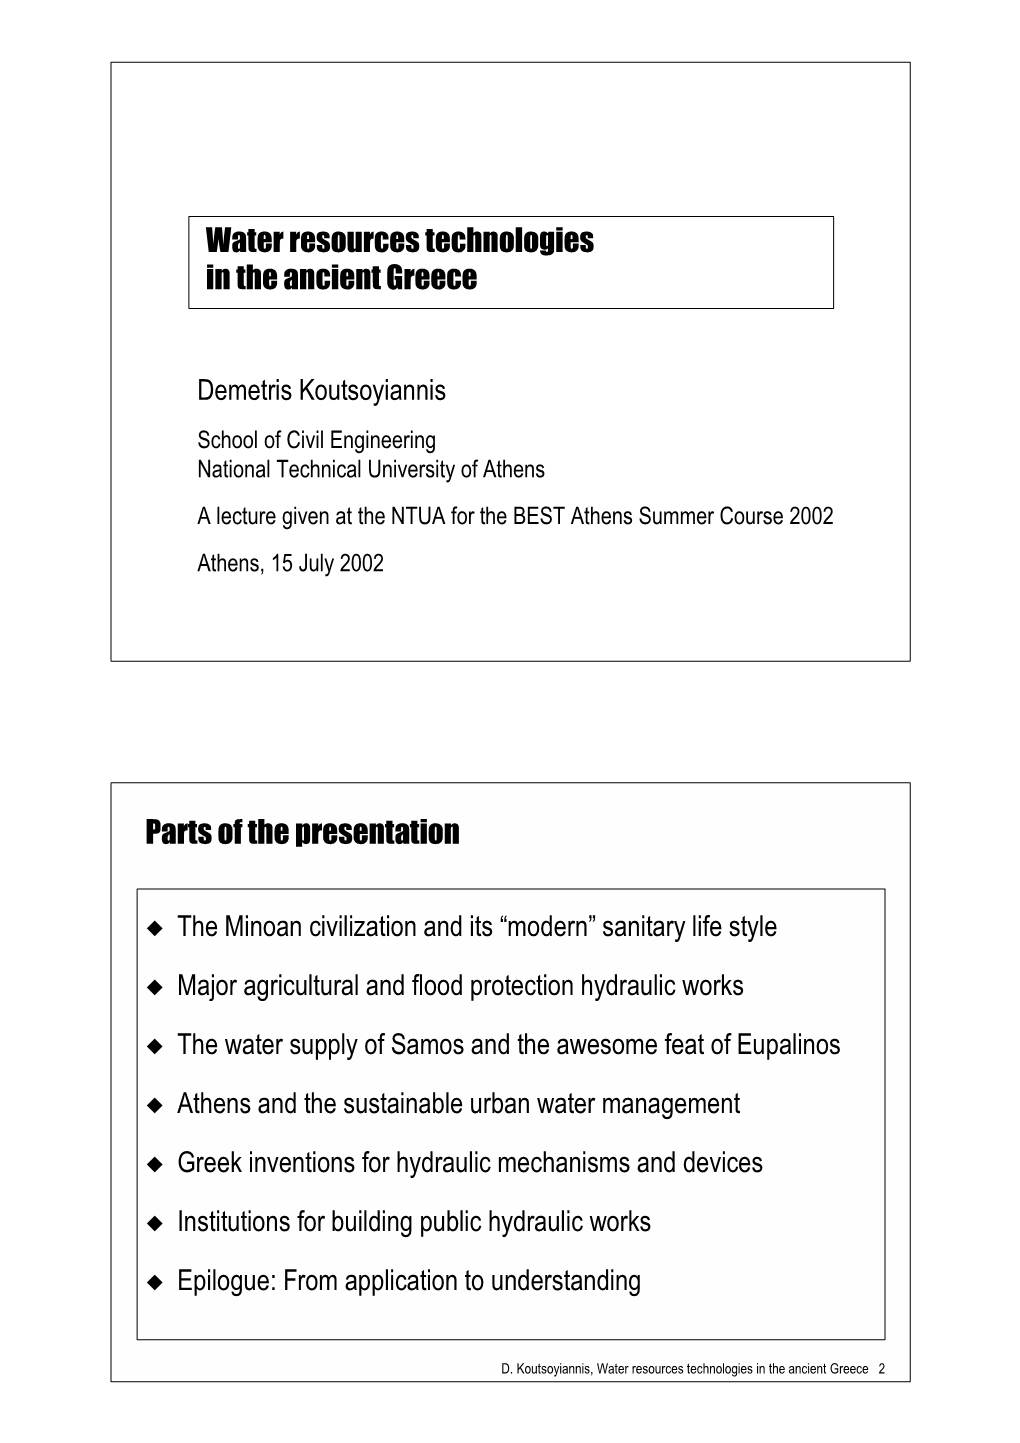 Water Resources Technologies in the Ancient Greece